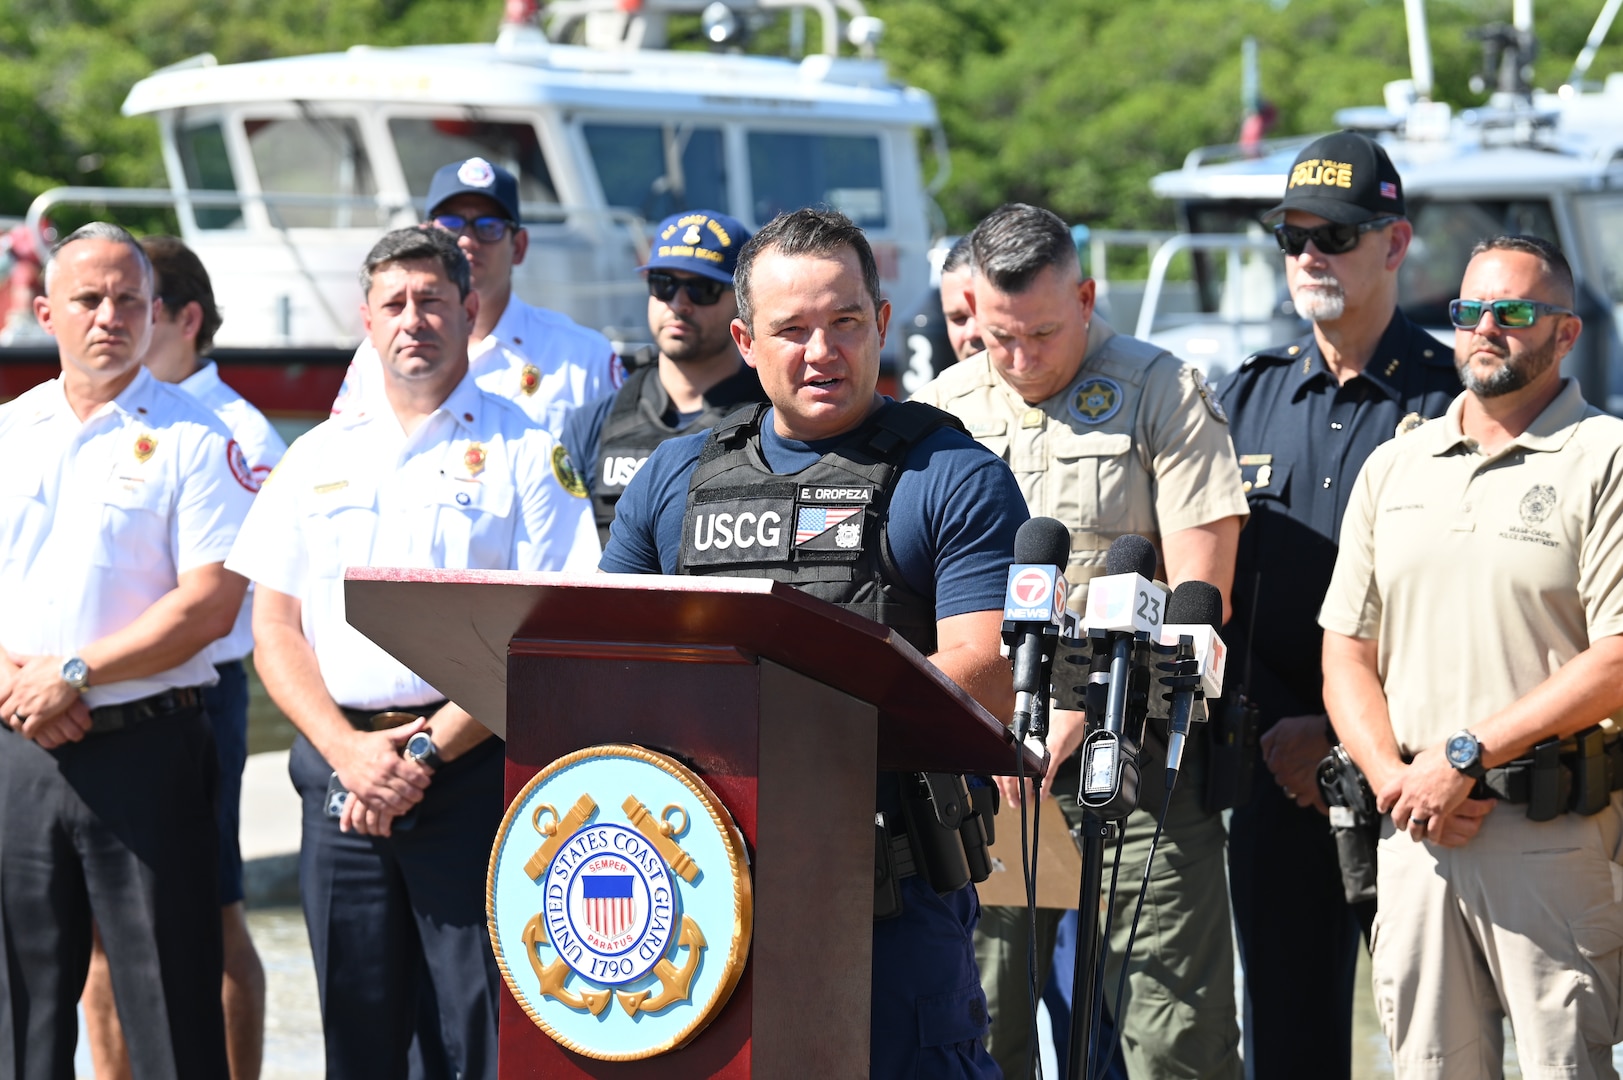 A Coast Guard Lt. Cmdr. speaks to a group in front of a podium.